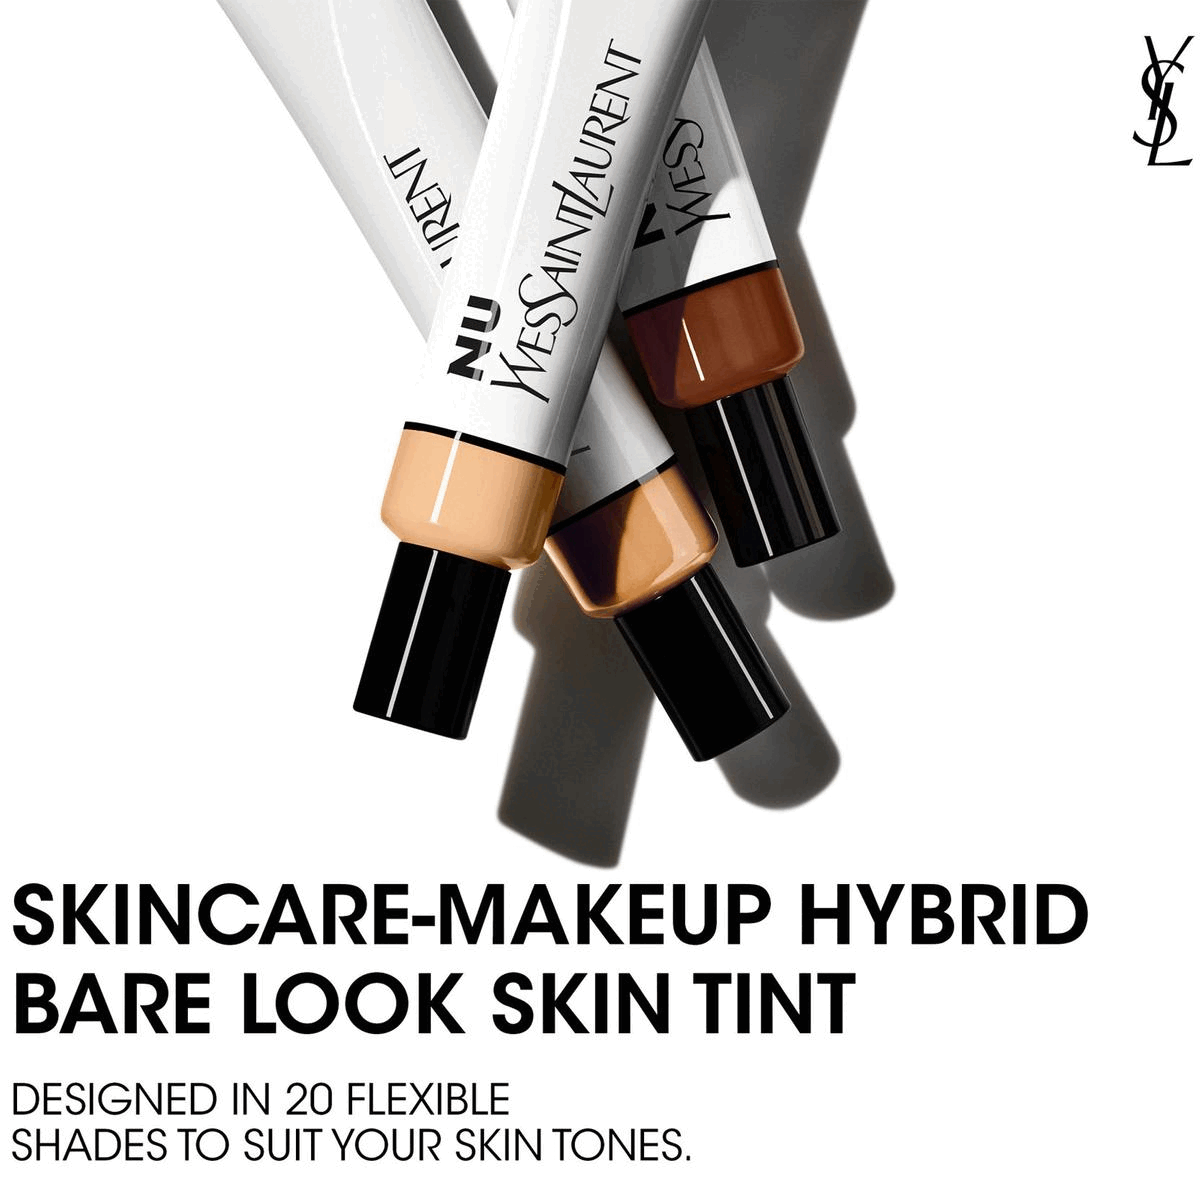 Image 1, skincare-makeup hybrid bare look skin tint, designed in 20 flexible shades to suit your skin tone. Image 2, 90% skincare based. Skincare-makeup hybrid skin tint with hylauronic acid and marsh mallow from our ourika community gardens.